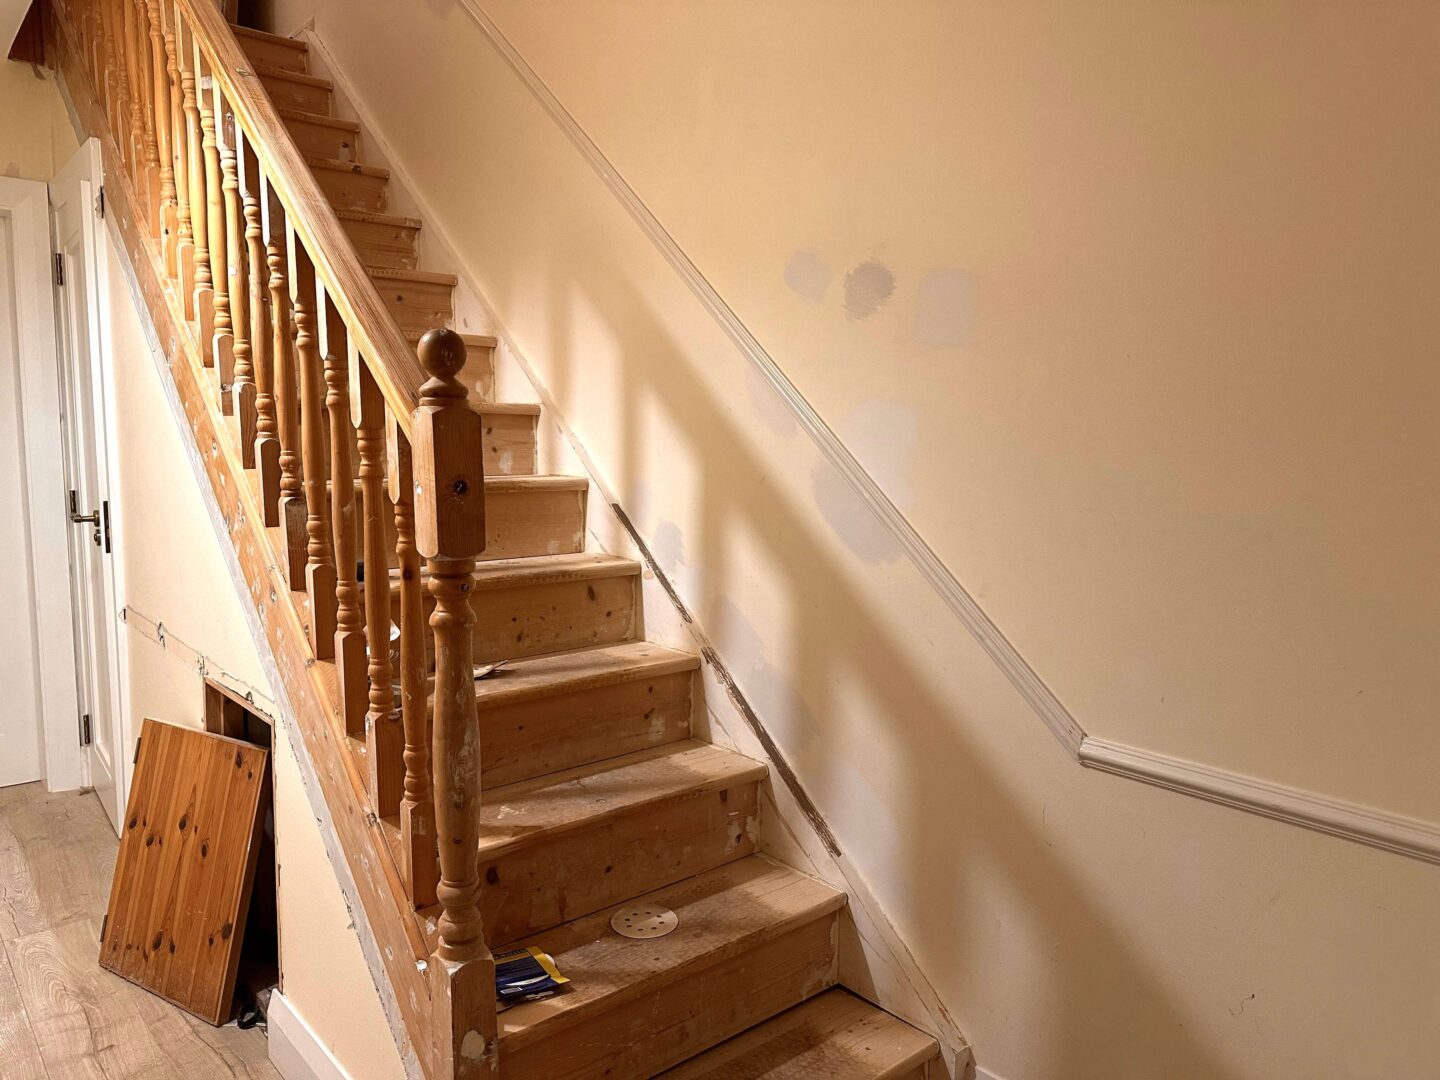 A hallway and stairs in the middle of sanding prep.